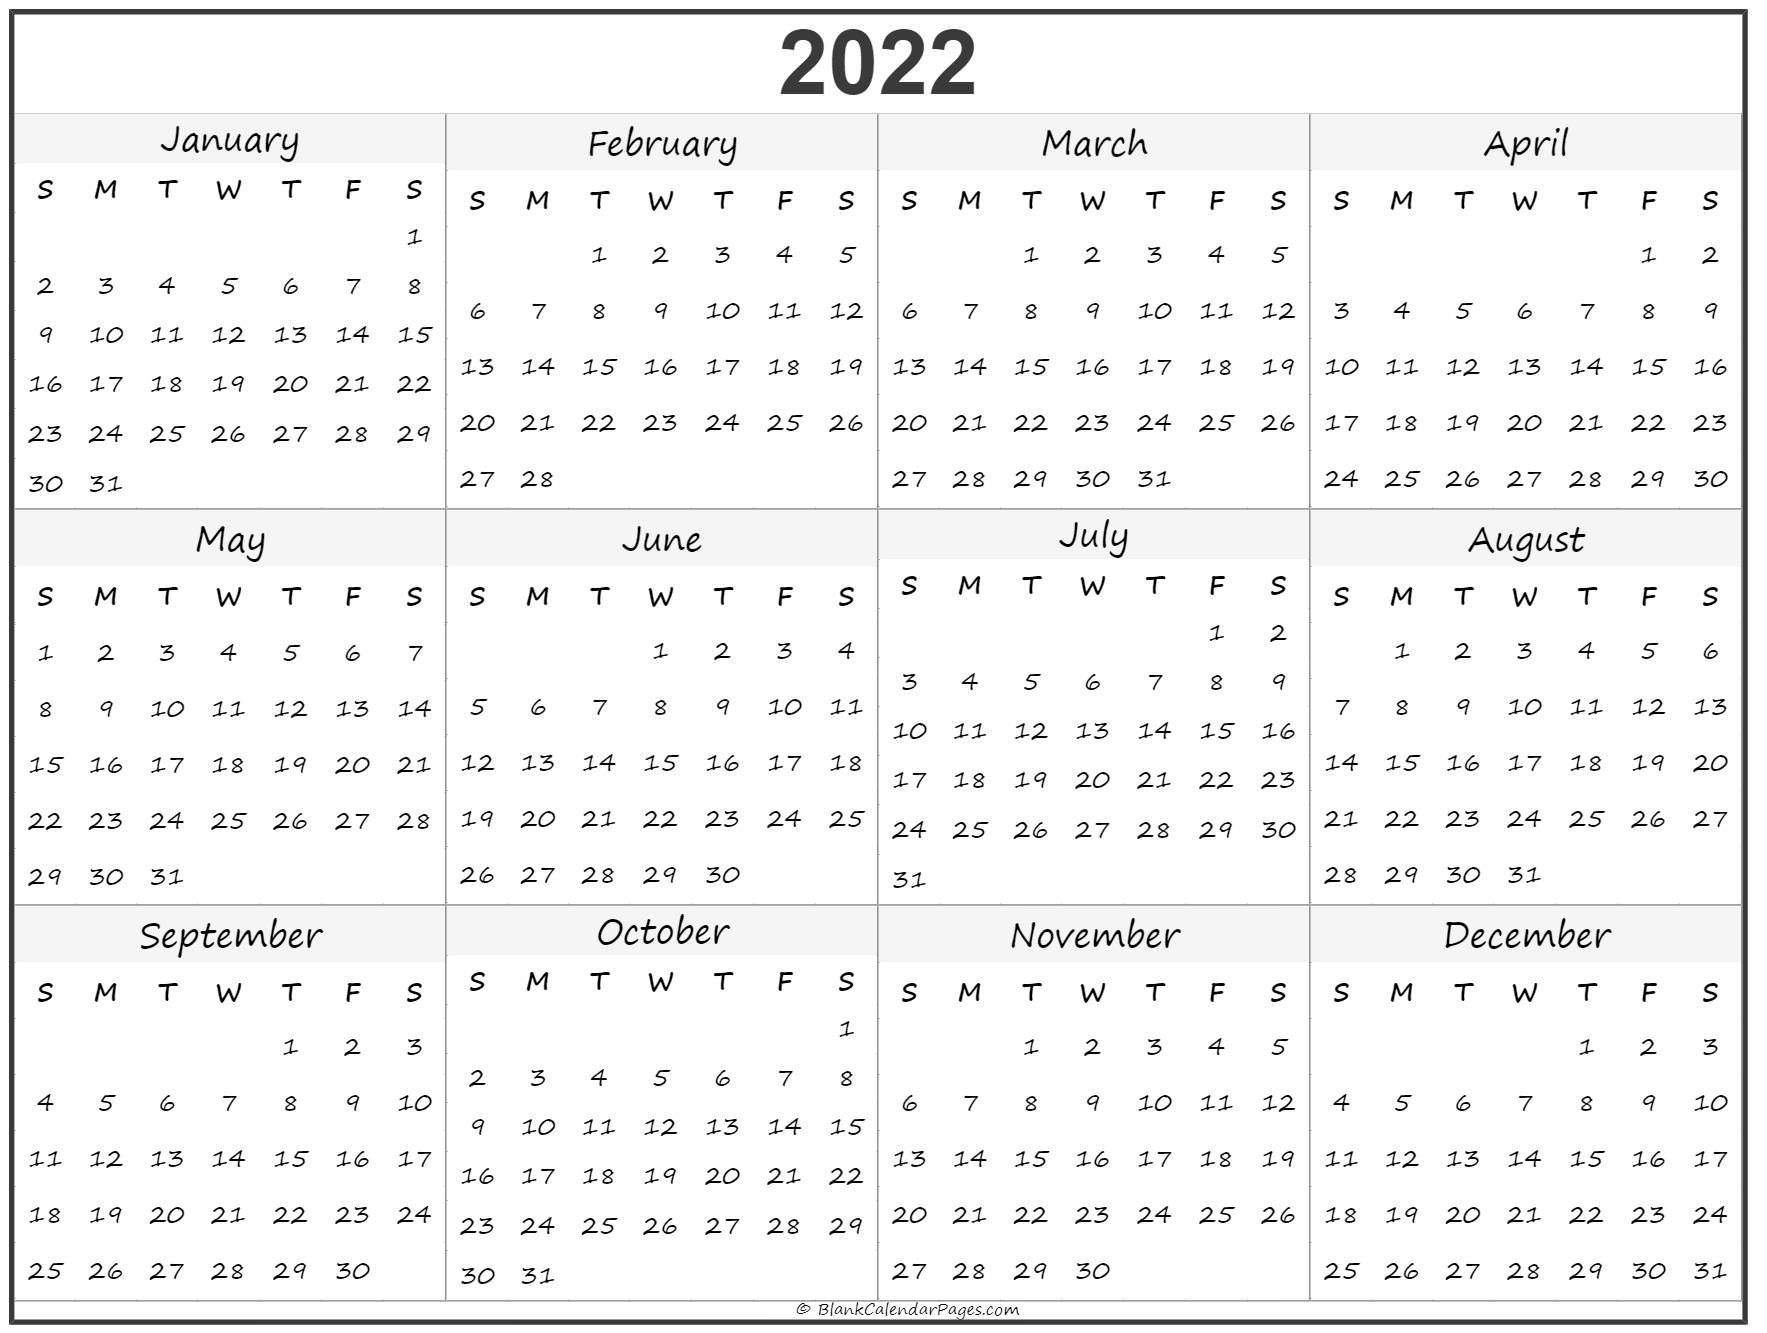 Yearly Calendar For 2022